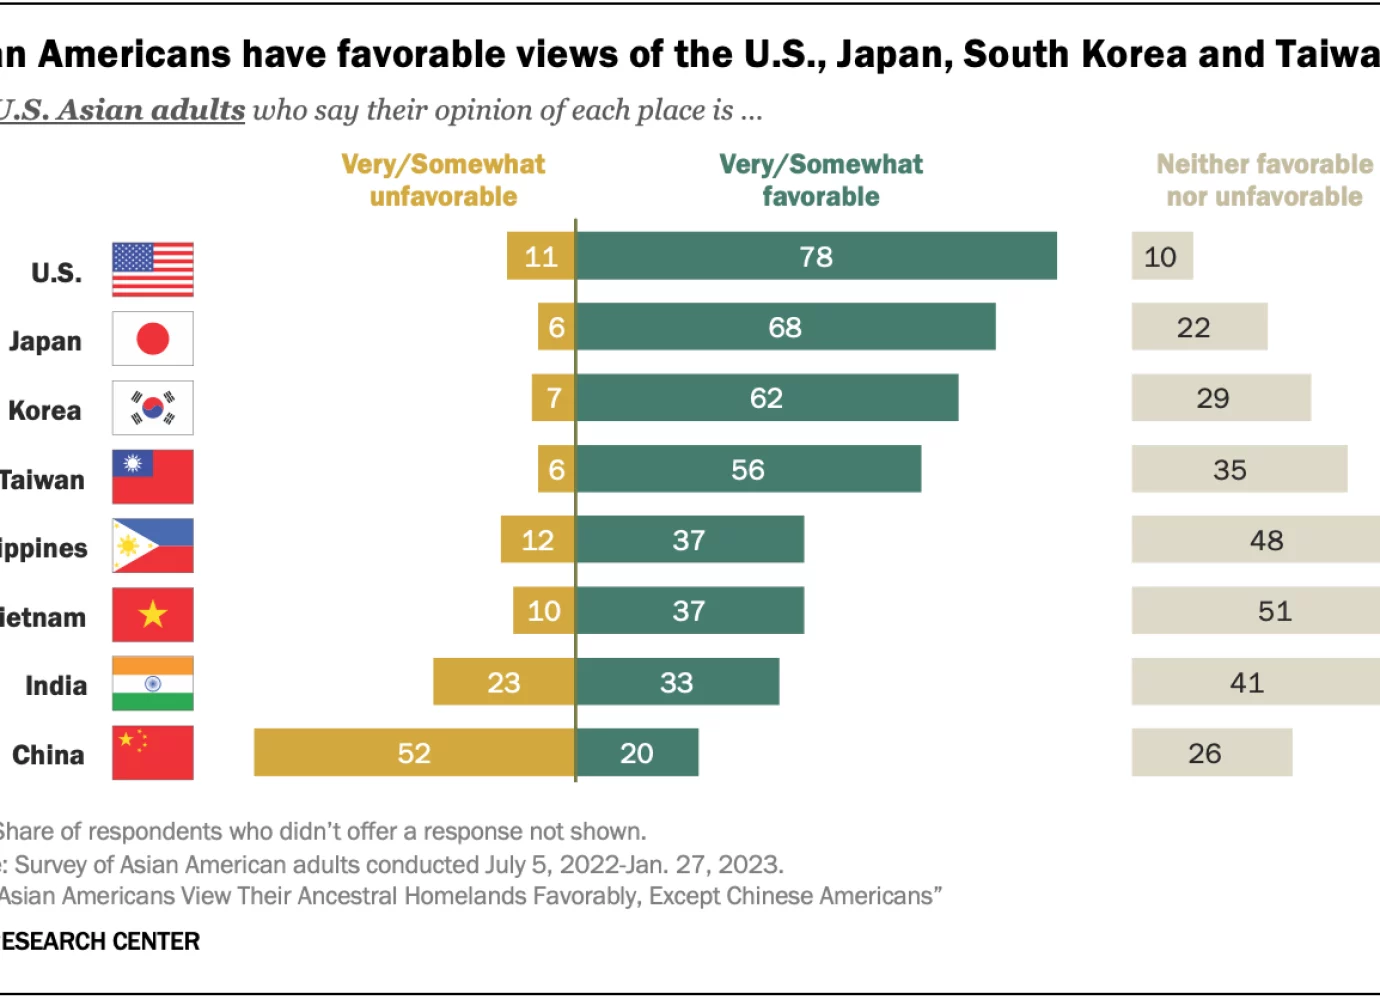 Most Asian Americans View Their Ancestral Homelands Favorably, Except Chinese Americans